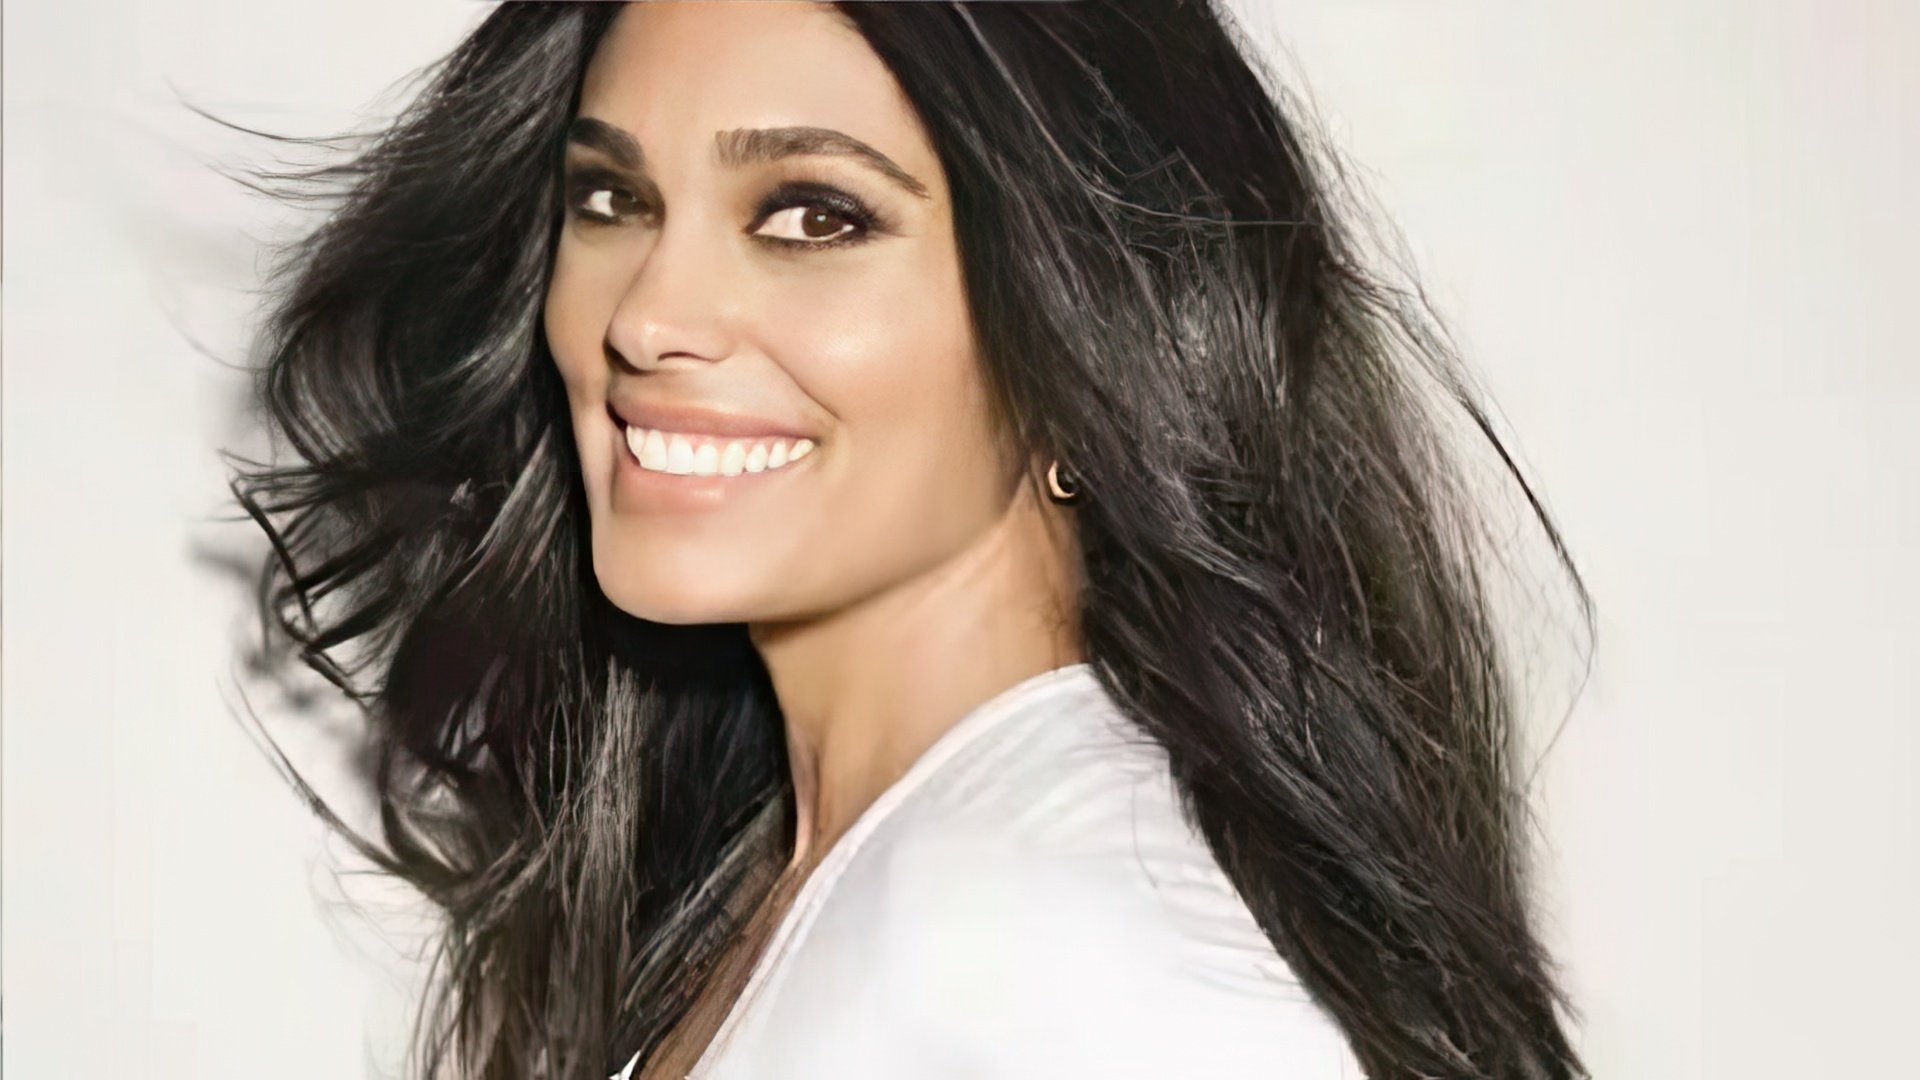 Beyoncé’s fans decided that Jay-Z was cheating on her with Rachel Roy (pictured)